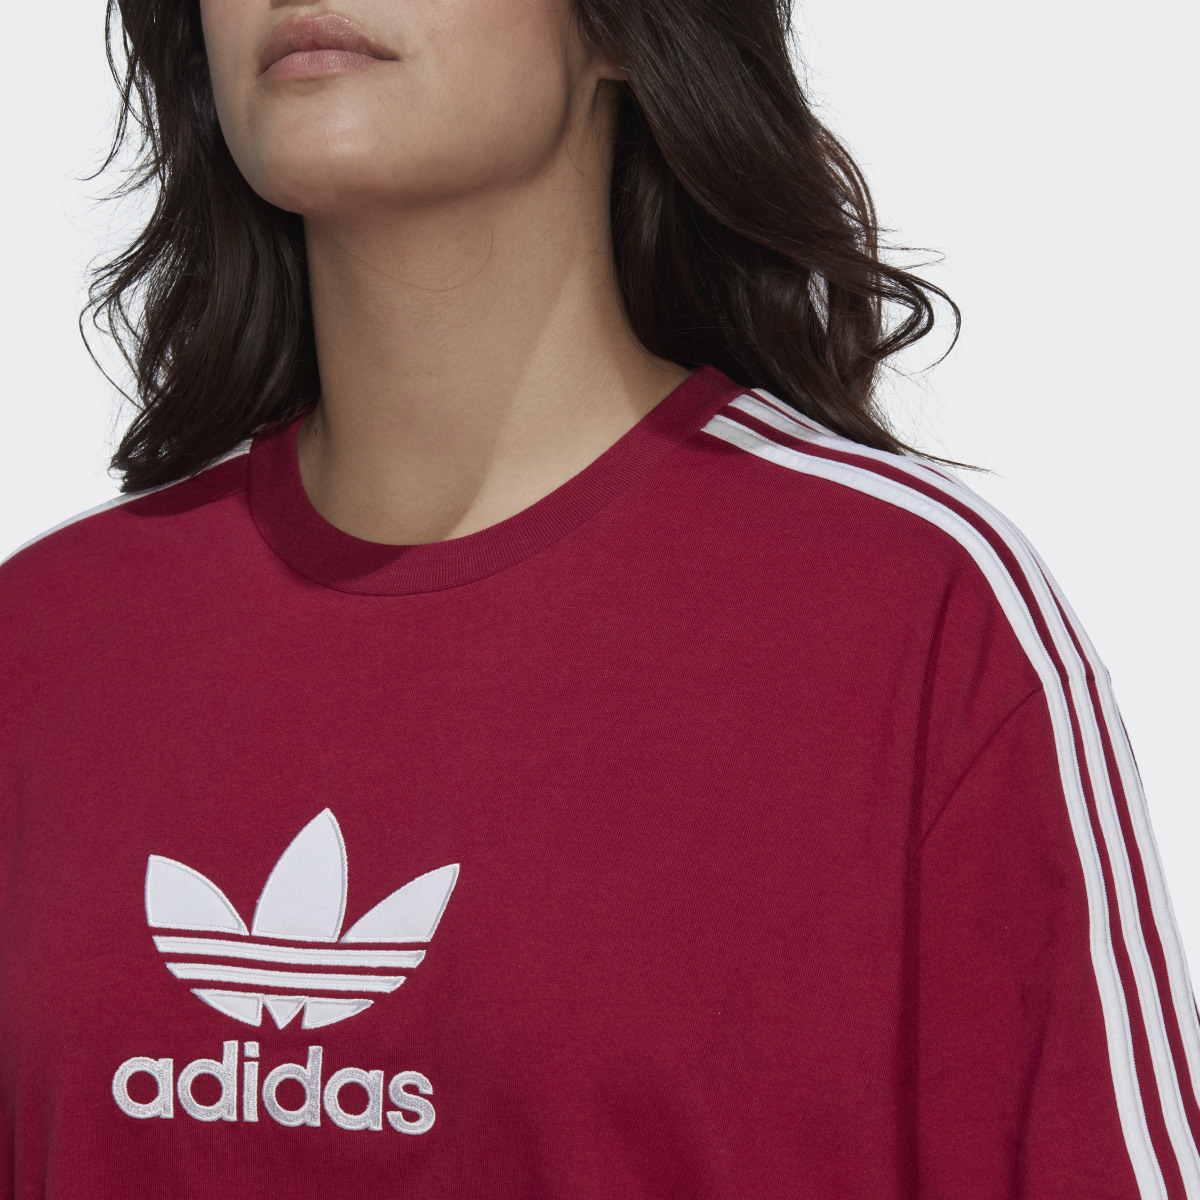 Adidas Centre Stage Tee (Plus Size). 6